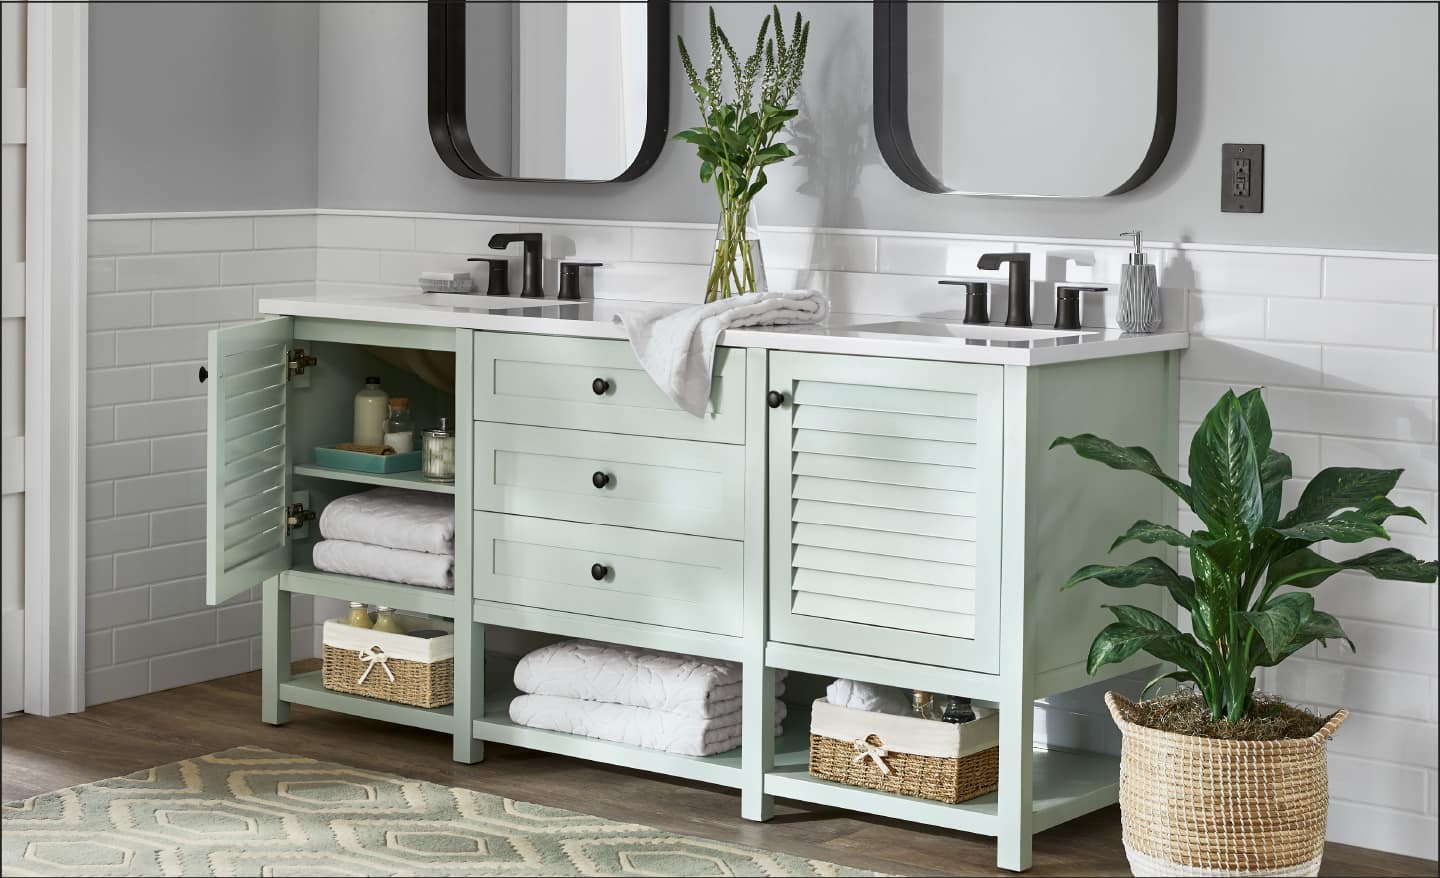 Bathroom vanity cabinet in soft green color with white countertops